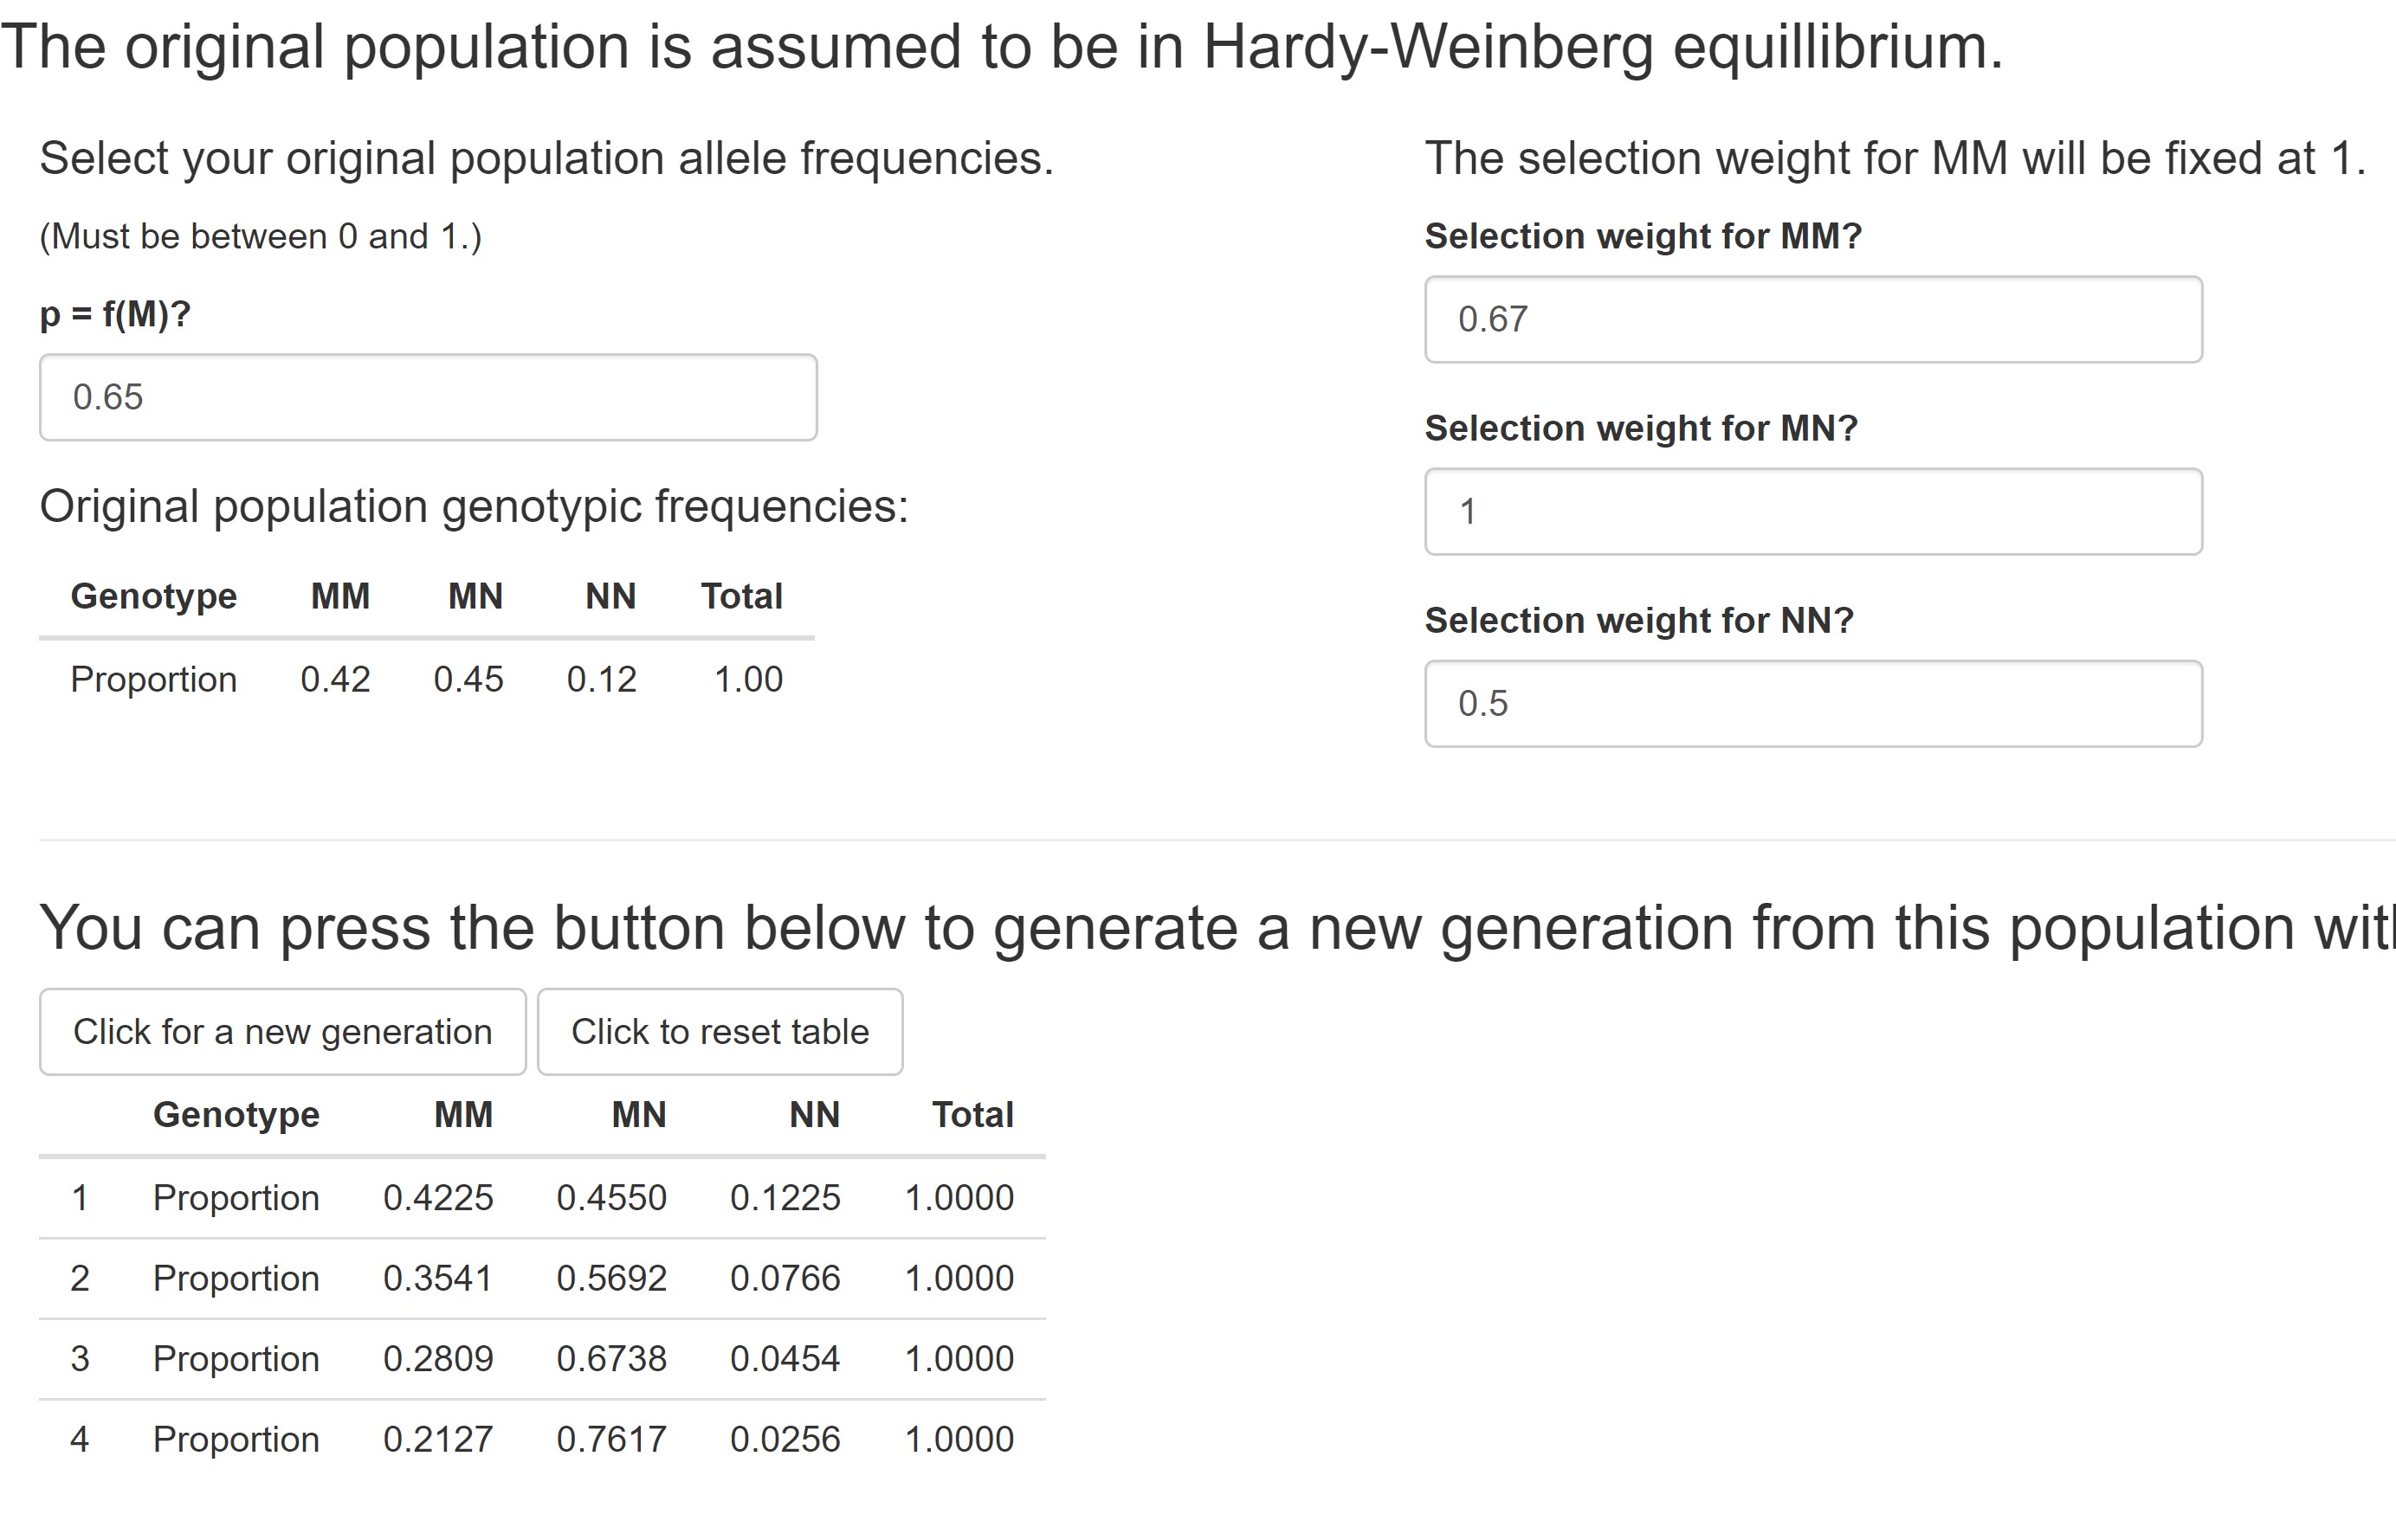 Image from the interactive application to aide in understanding selection from a population in HW equilibrium